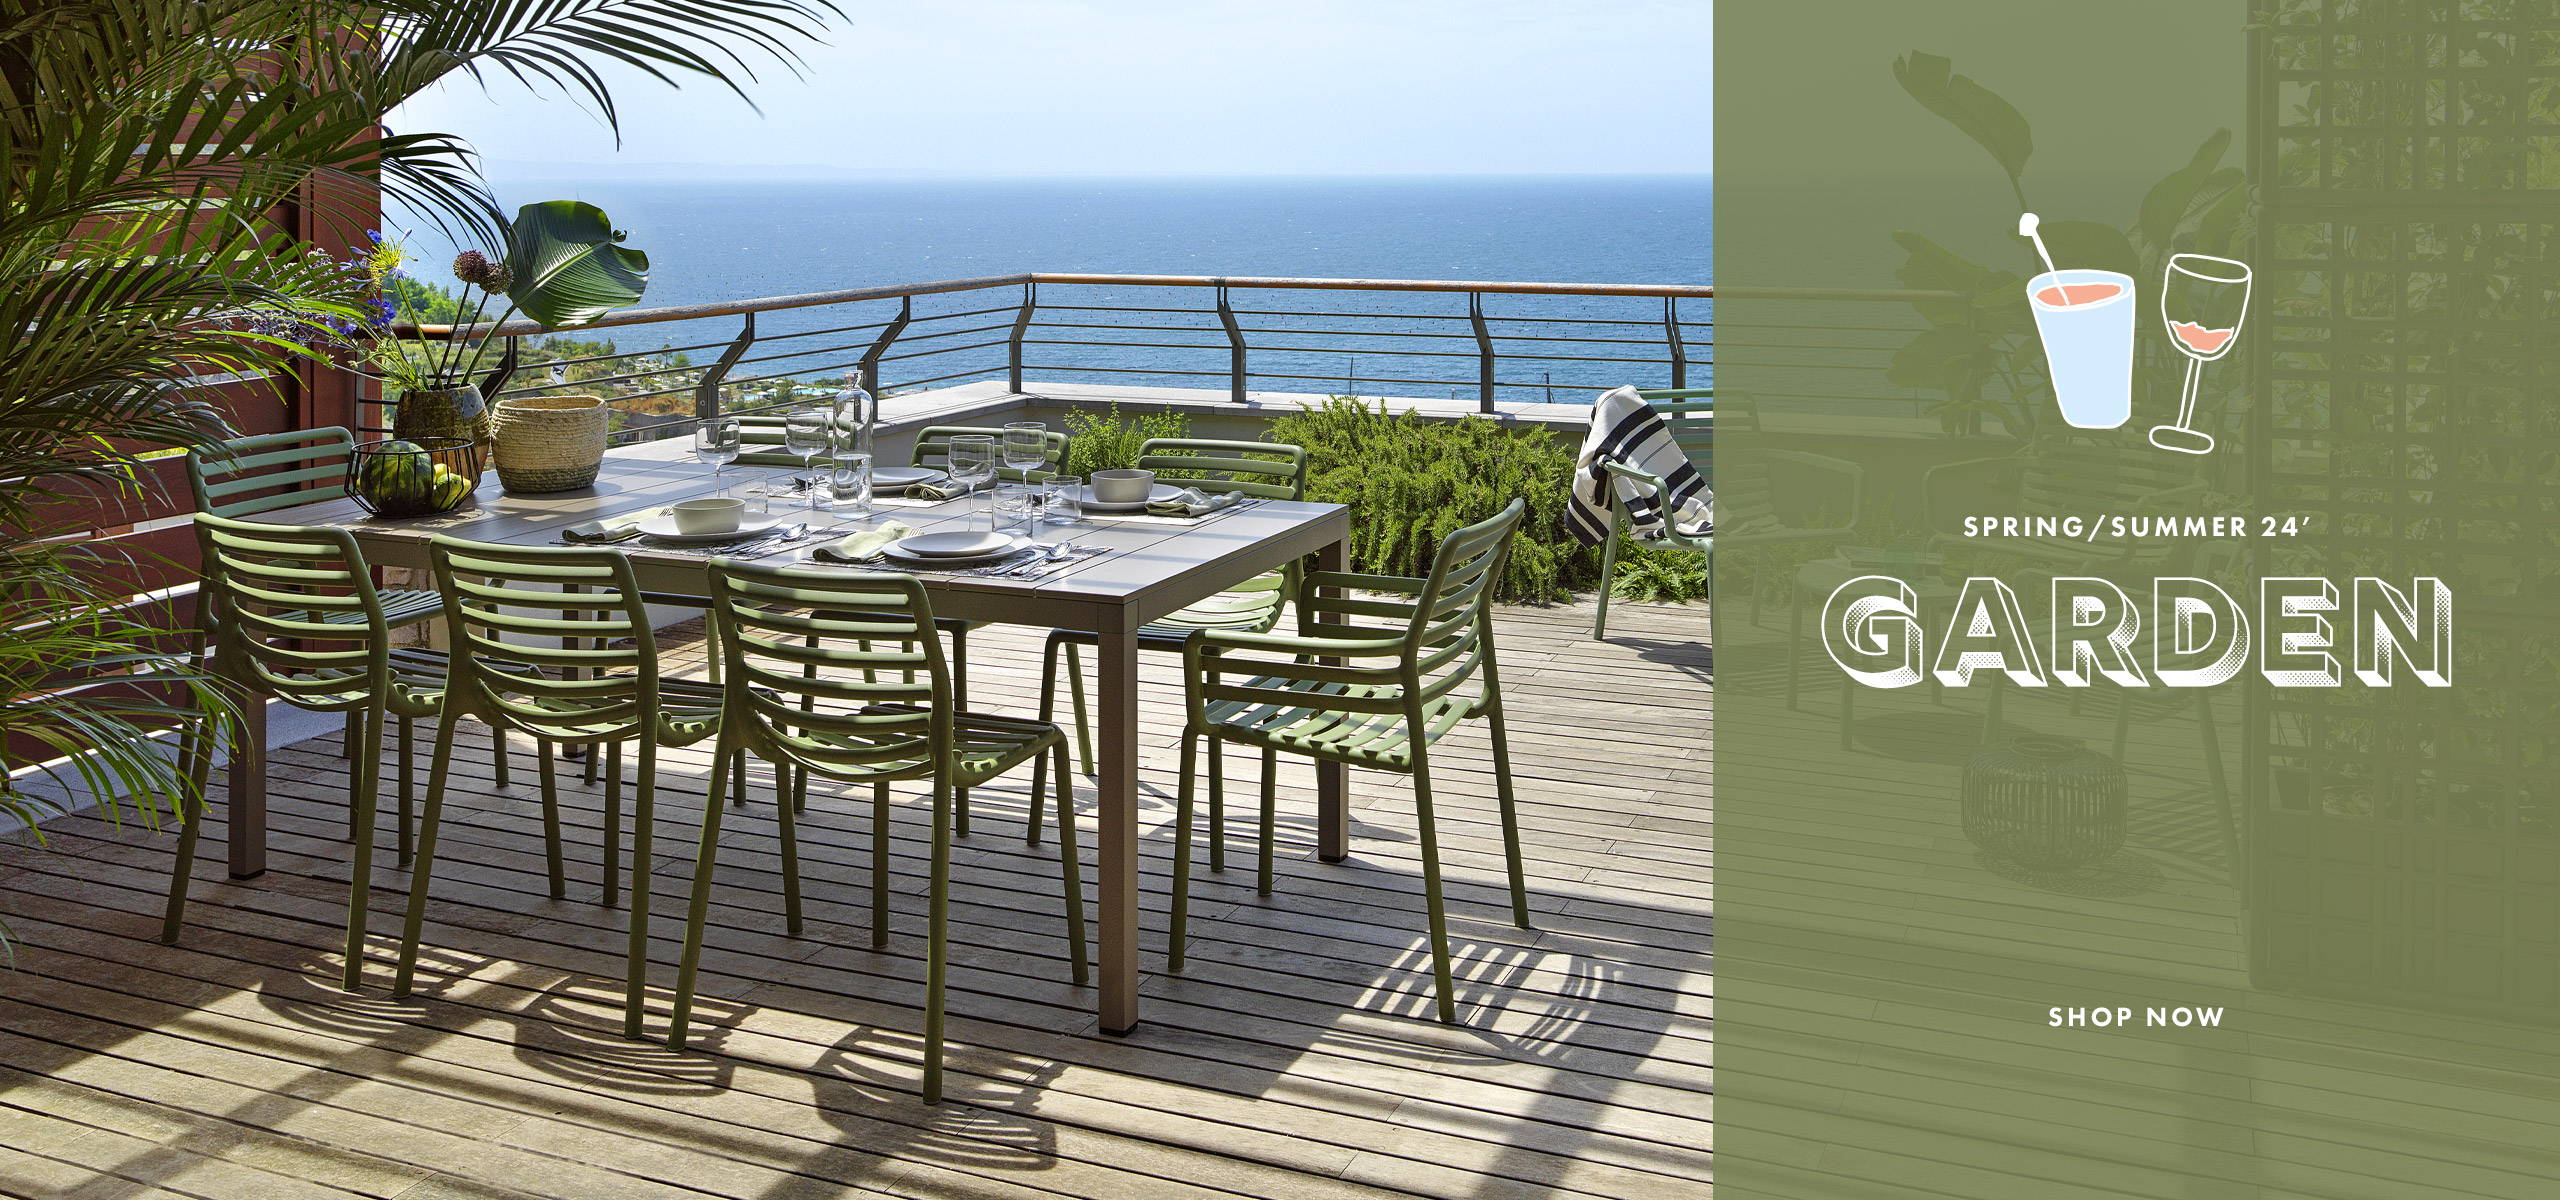 Winter Sale Now On - Upto 25% Off Dining Tables & Chairs